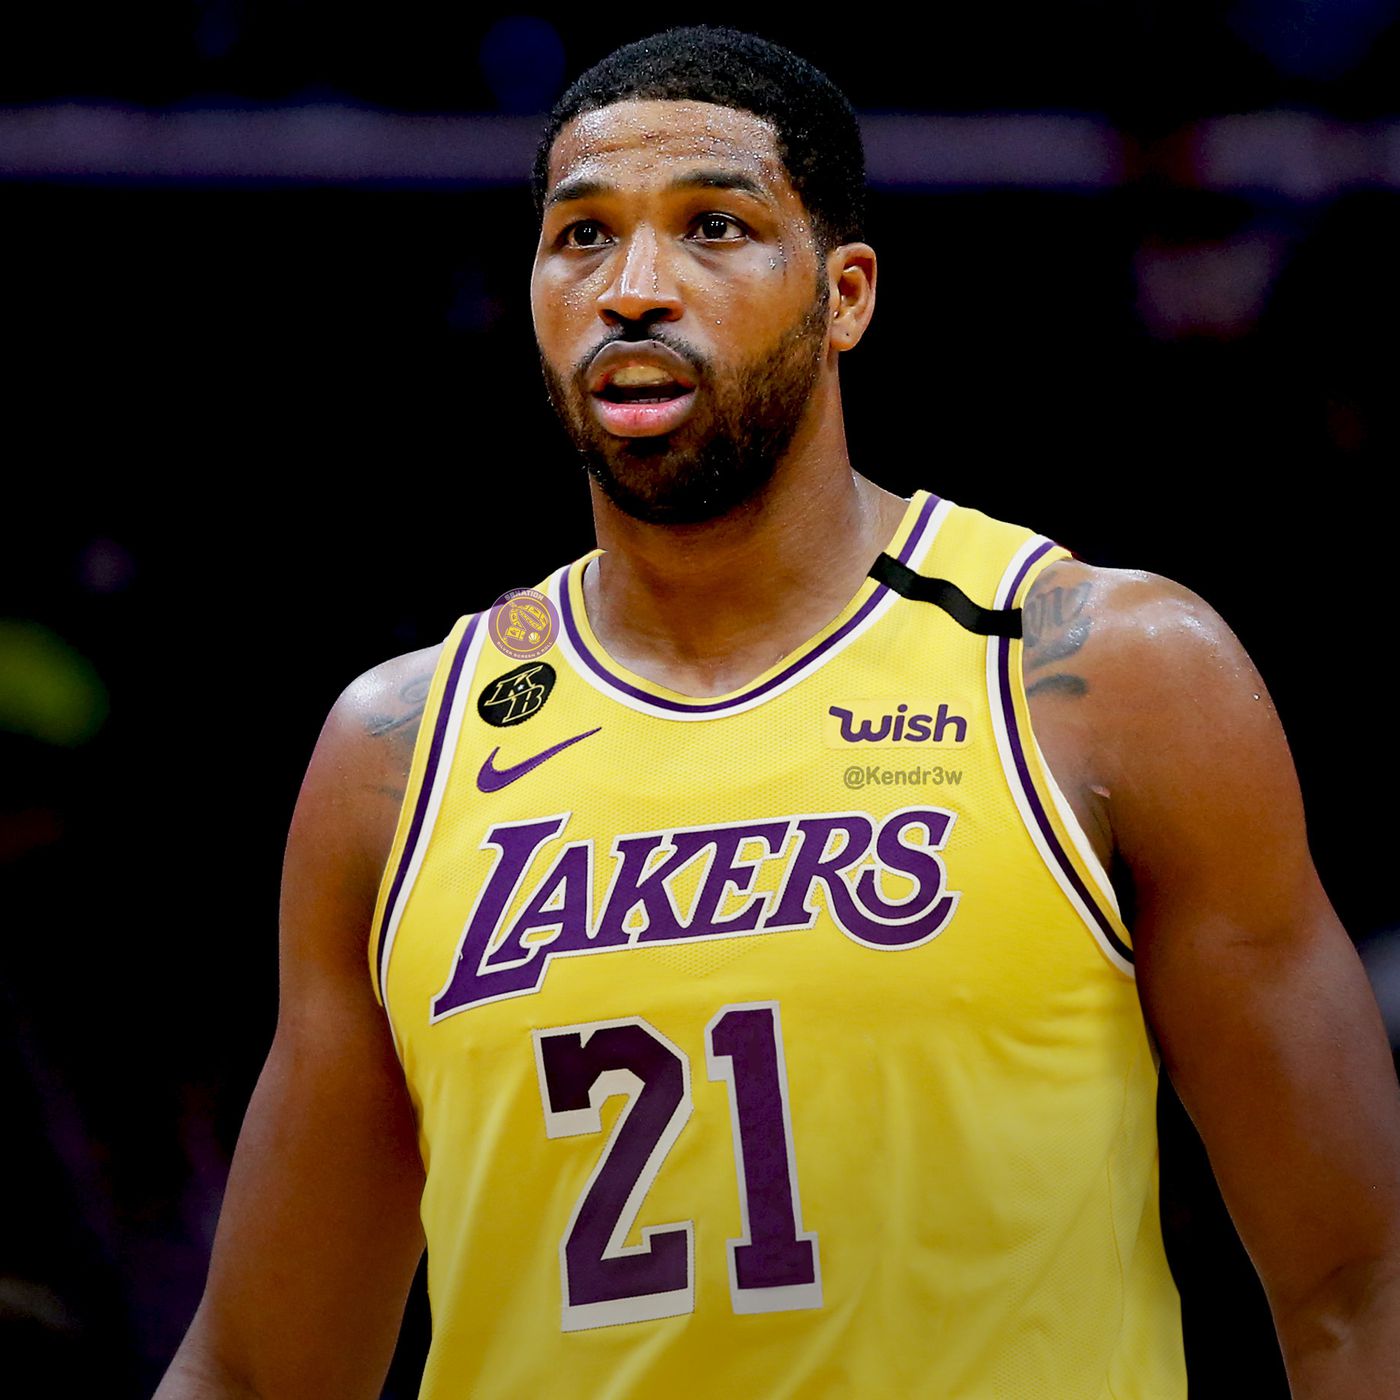 Tristan Thompson played for Los Angeles Lakers